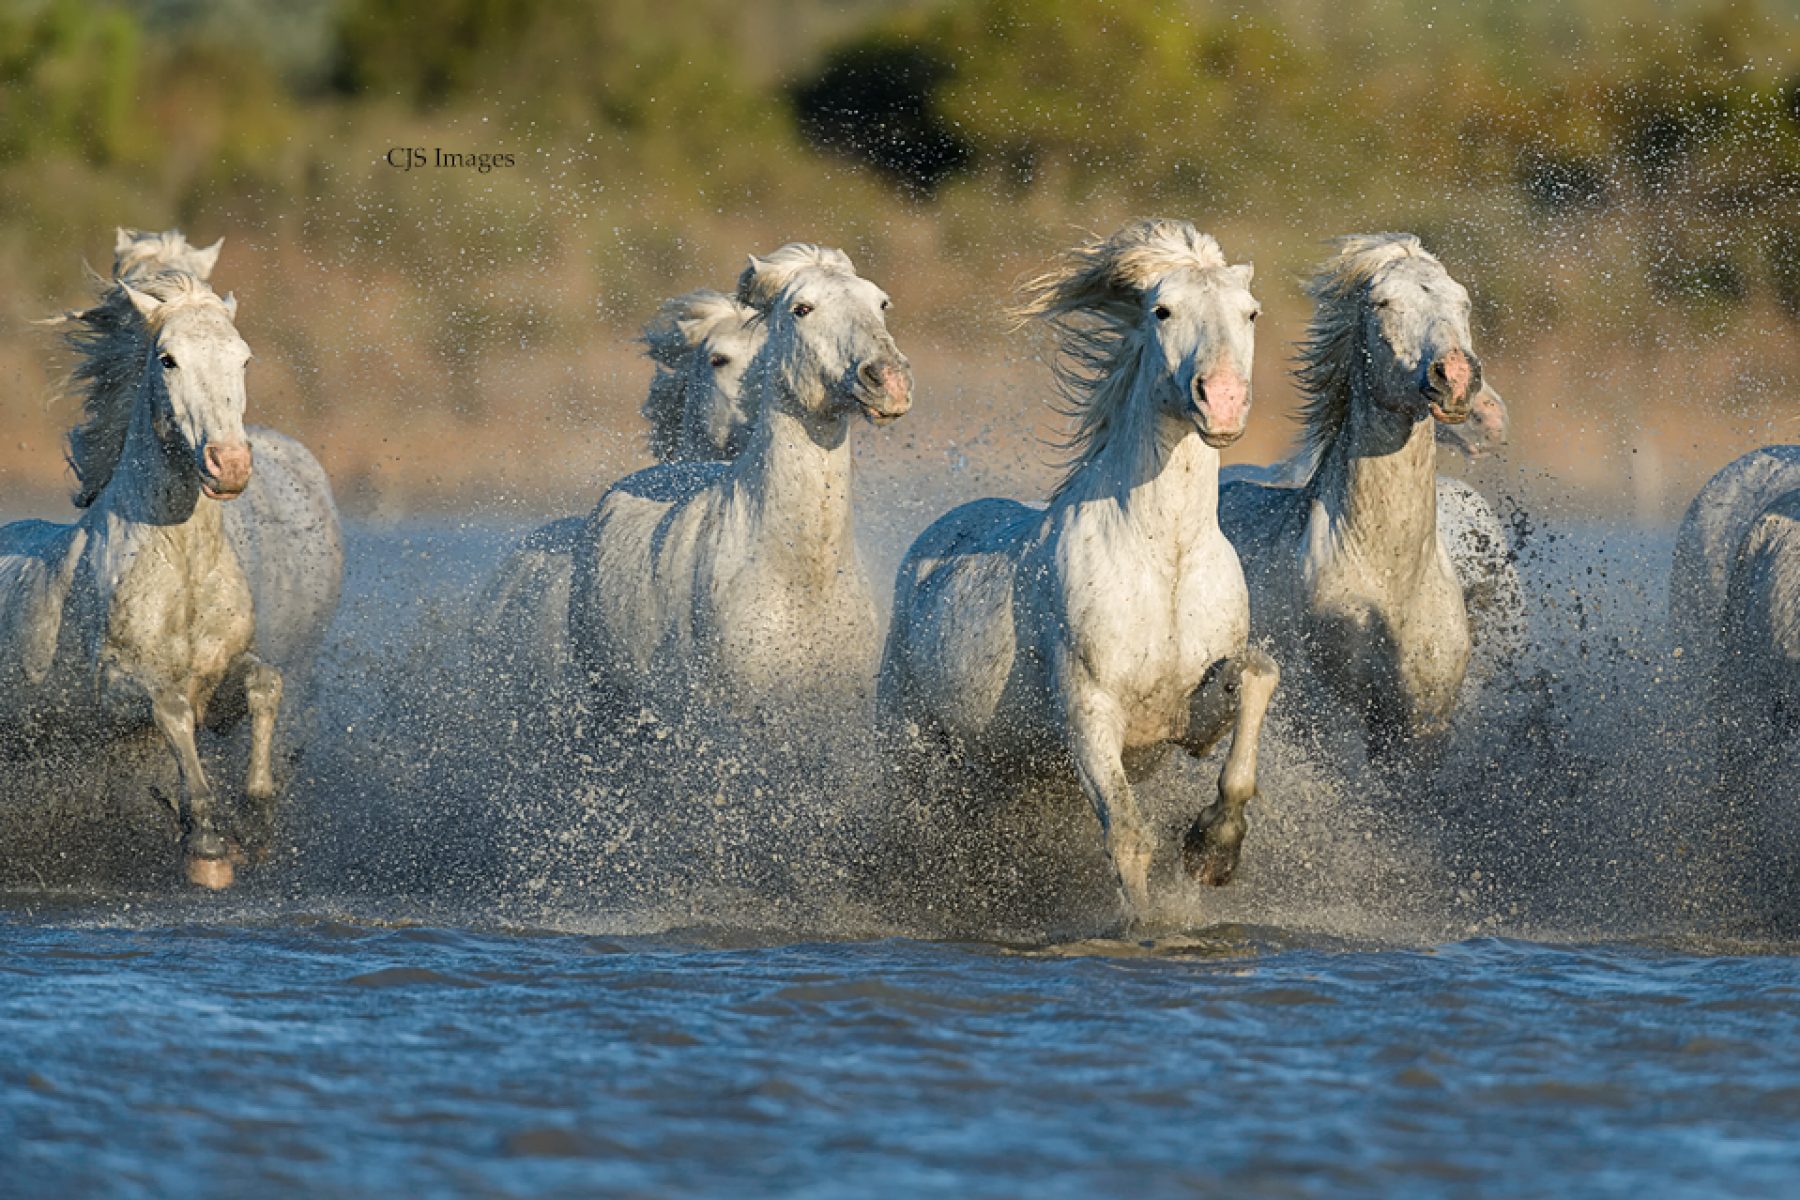 The White Horses Of The Camargue